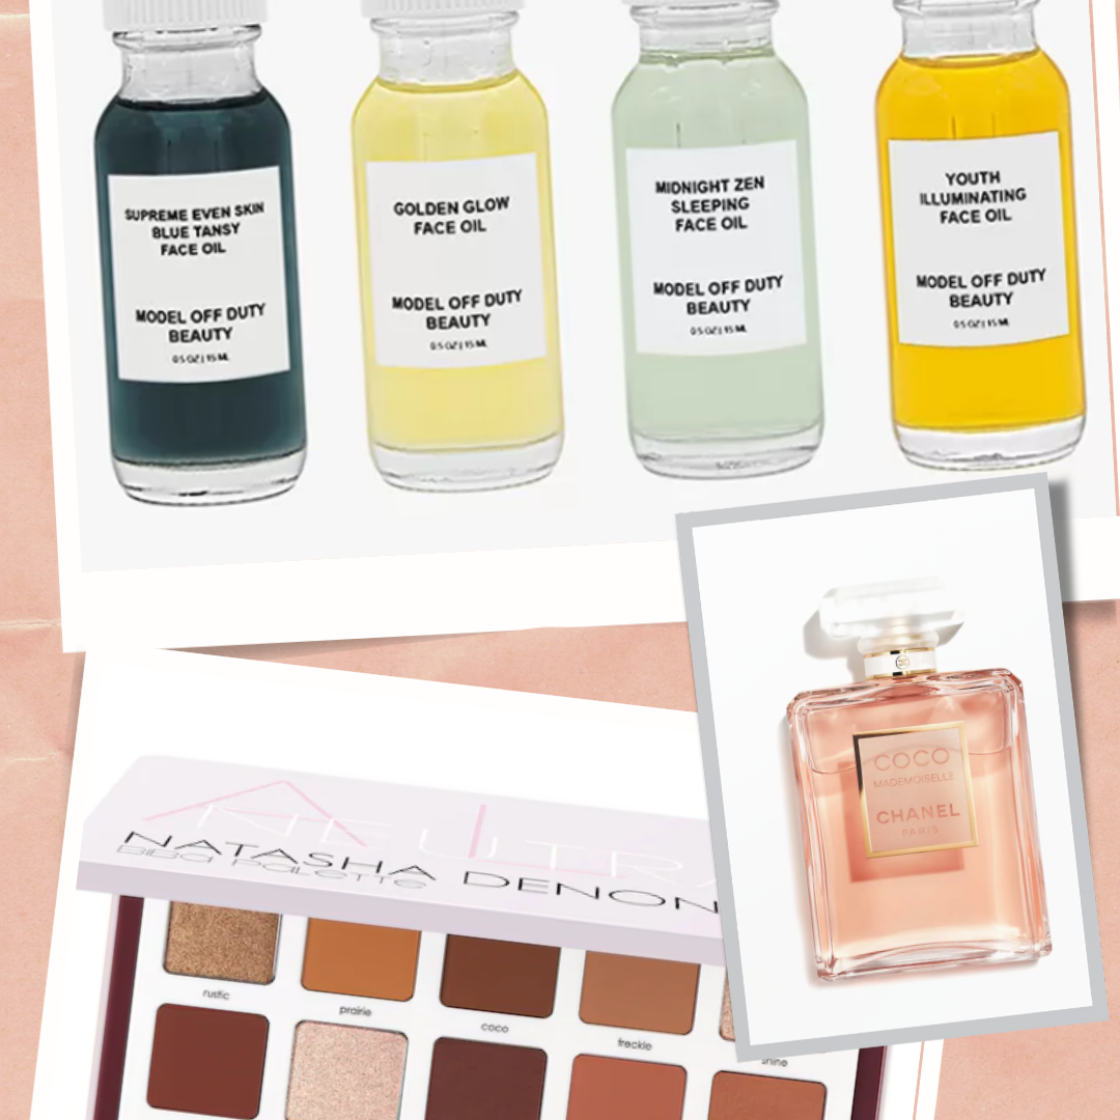 11 Thoughtful Beauty Gifts To Melt Your Valentine’s Heart <3